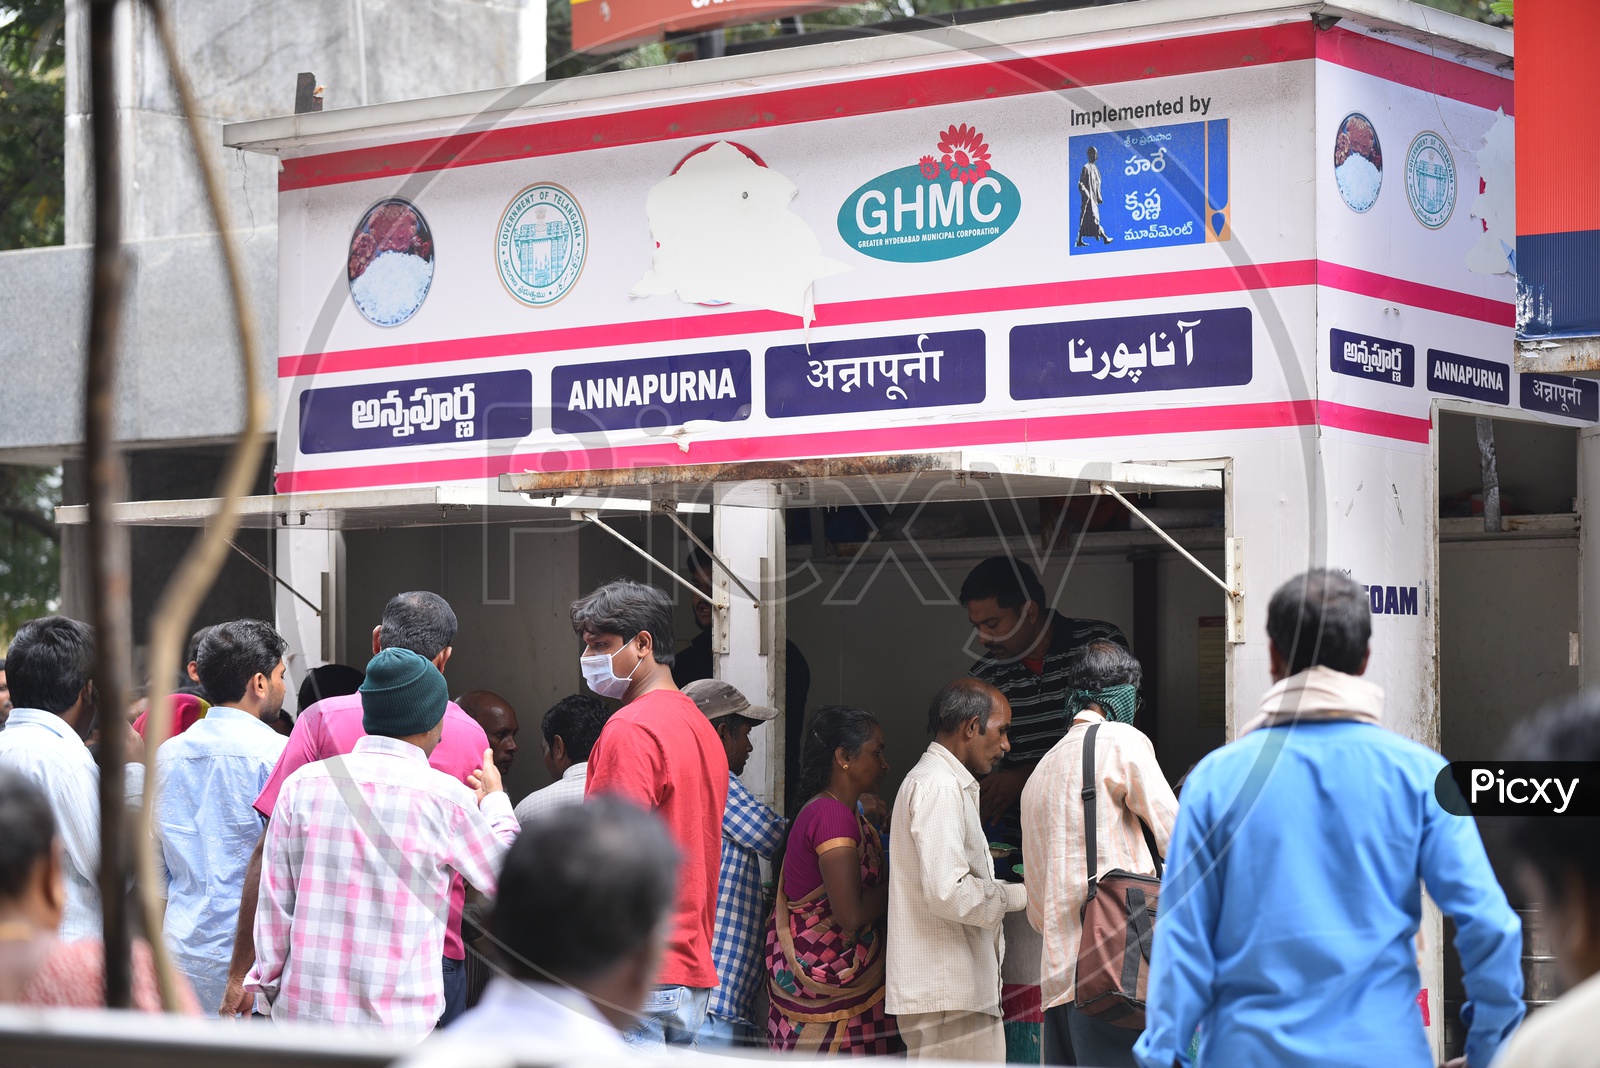 People Standing For Meals At GHMC Annapurna Meal Counter.